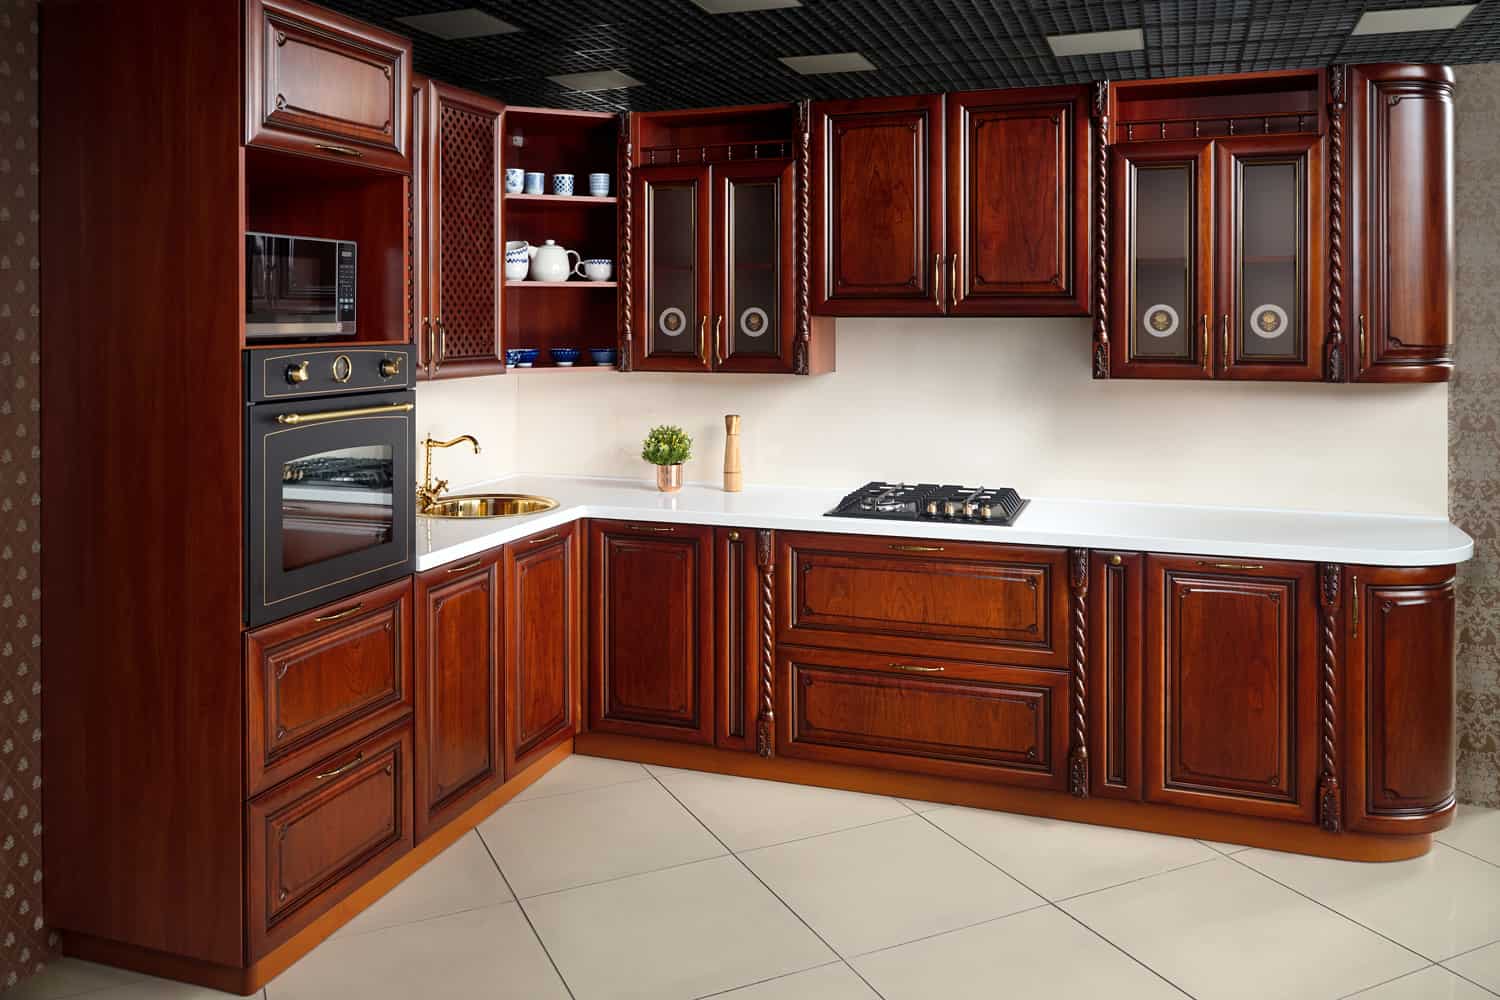 Interior of modern kitchen in classic style with golden elements cherry alder wood cabinetry with built-in appliances electric or induction hob, electric oven stone sink and extractor fan.